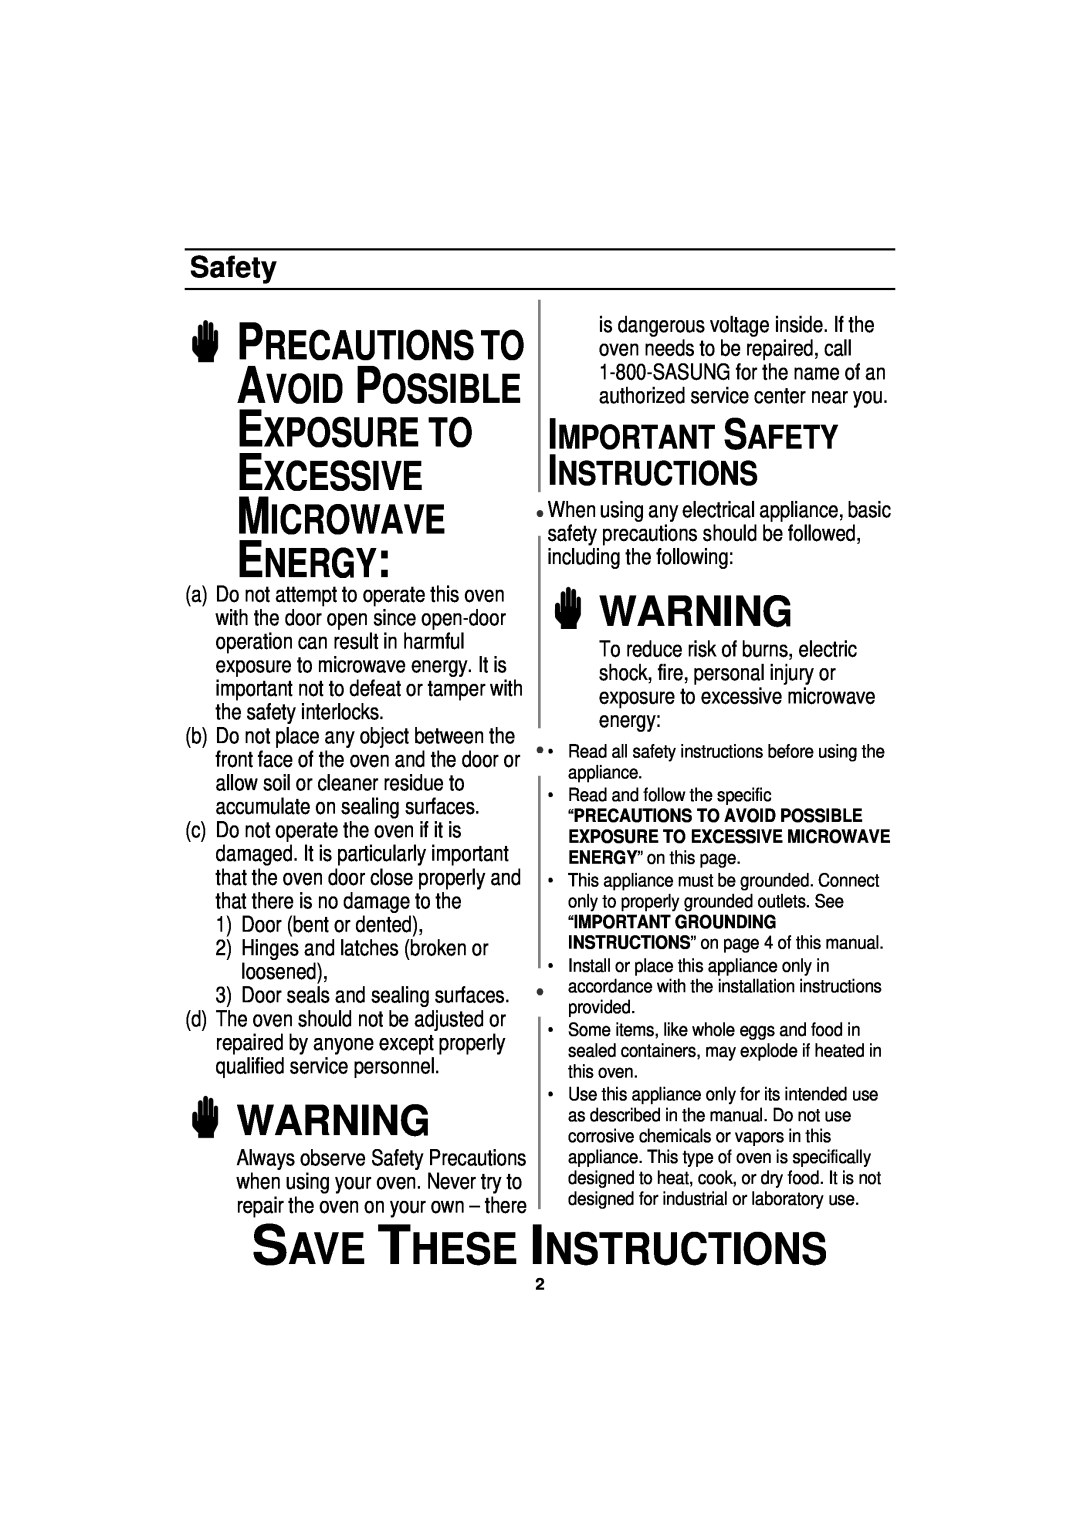 Samsung MW830BA Save These Instructions, Exposure To Excessive Microwave Energy, Precautions To Avoid Possible, Safety 